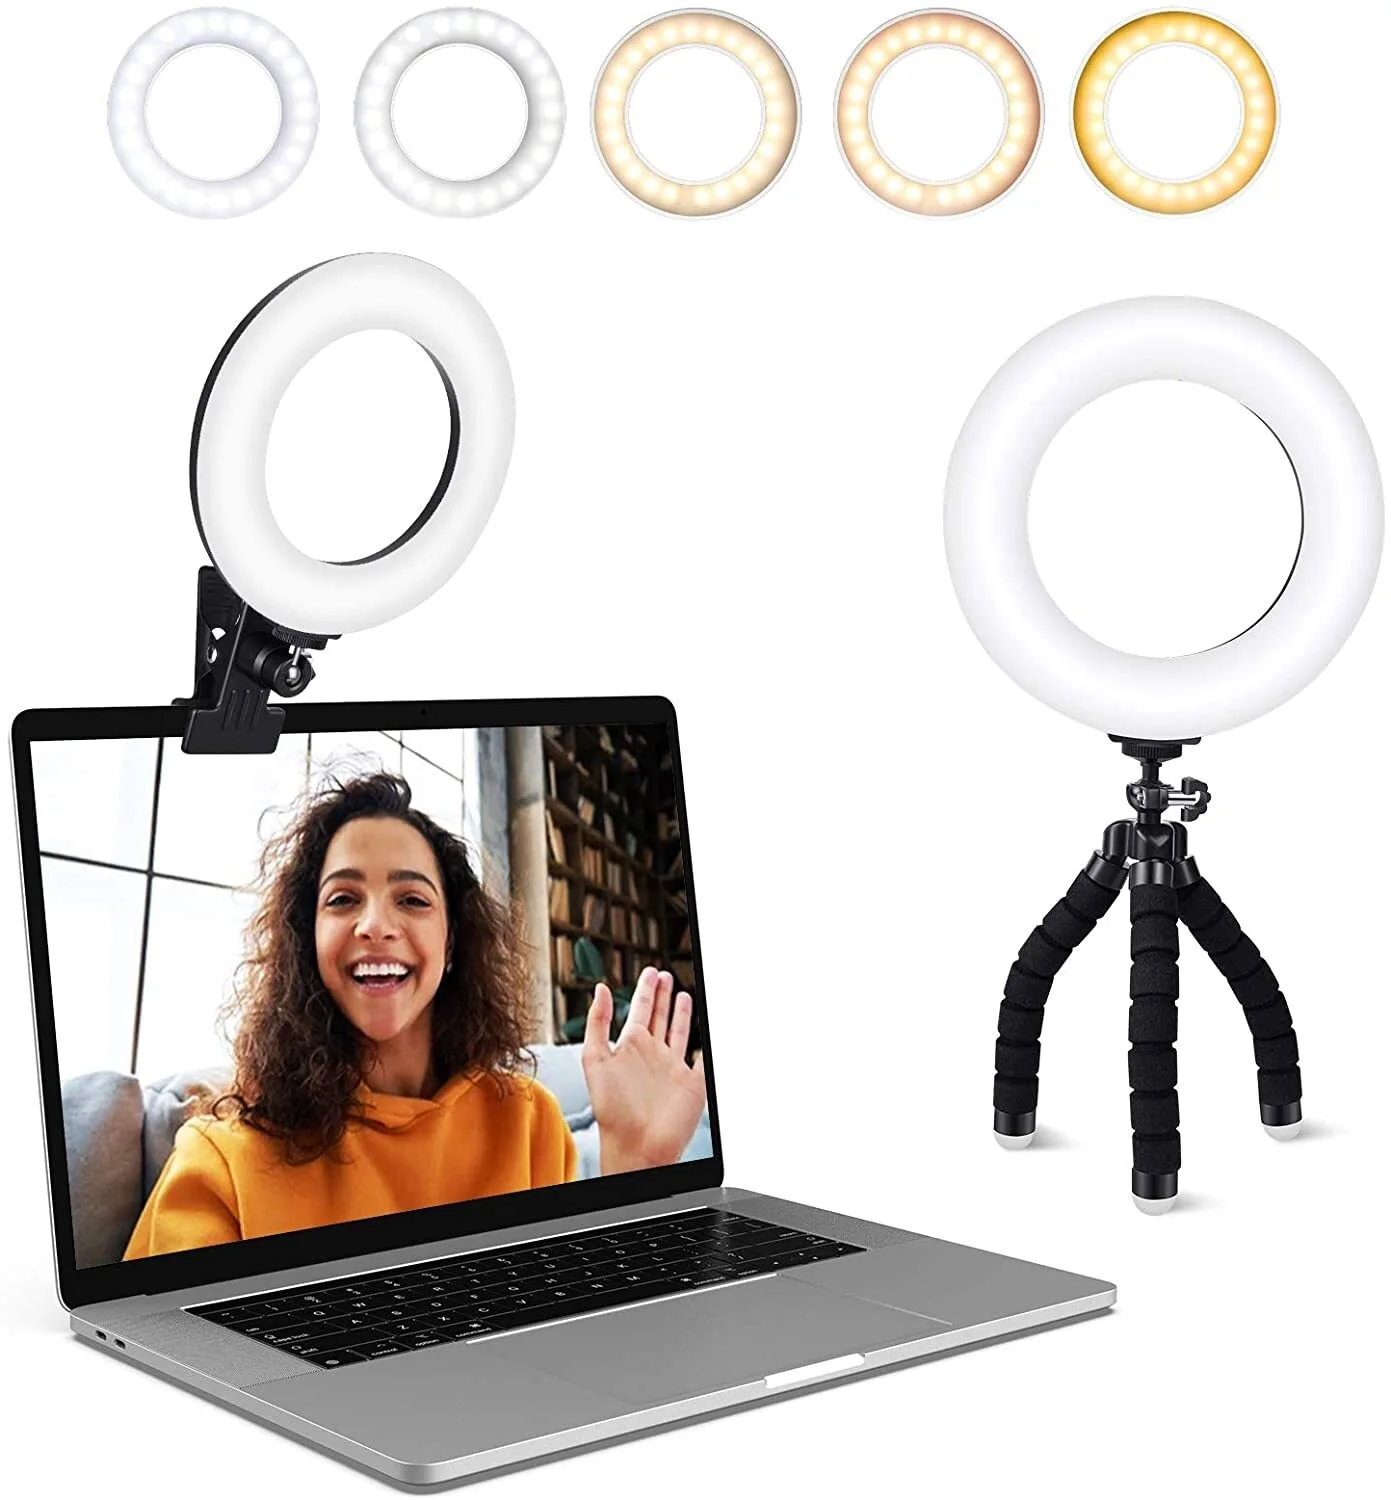 

Video Conference Lighting Kit, Ring Light Clip on Laptop Monitor with 5 Dimmable Color & 5 Brightness Level for Webcam